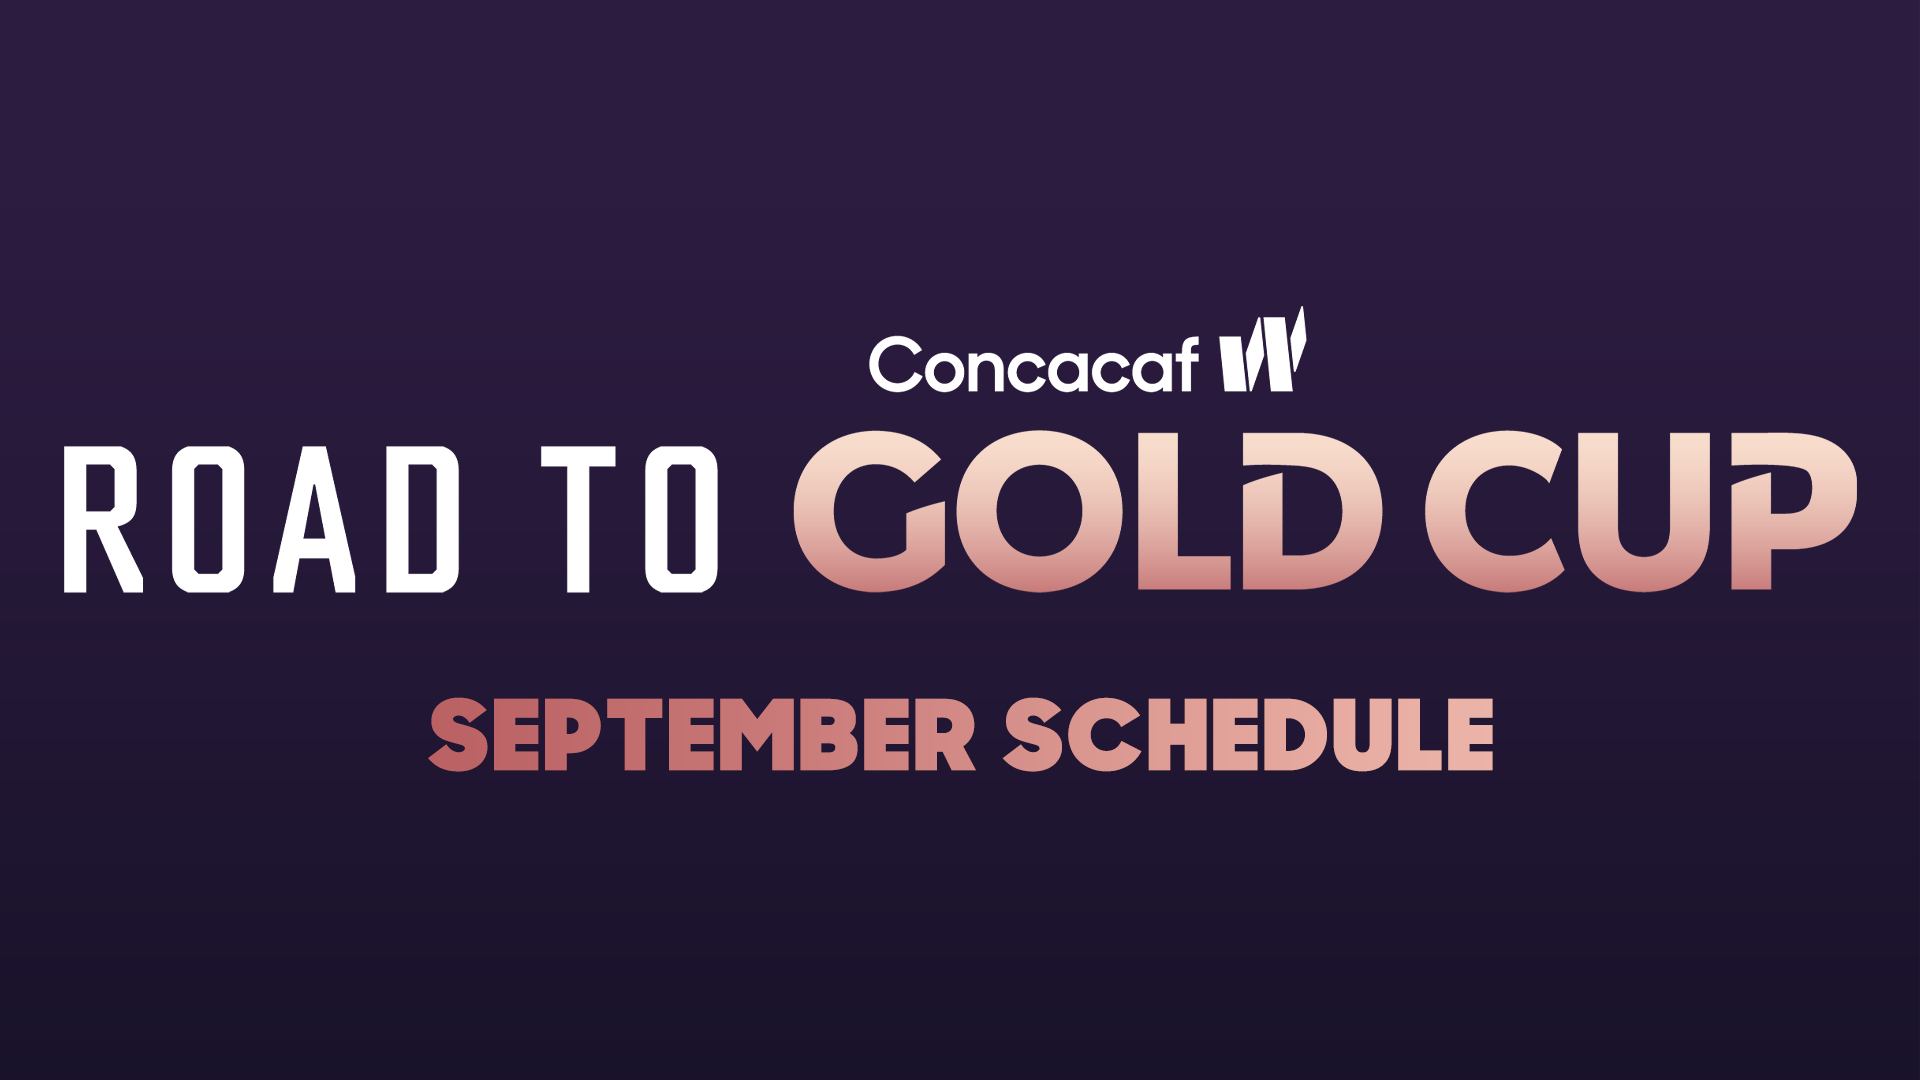 Concacaf confirms September schedule for 2023 Road to W Gold Cup Group